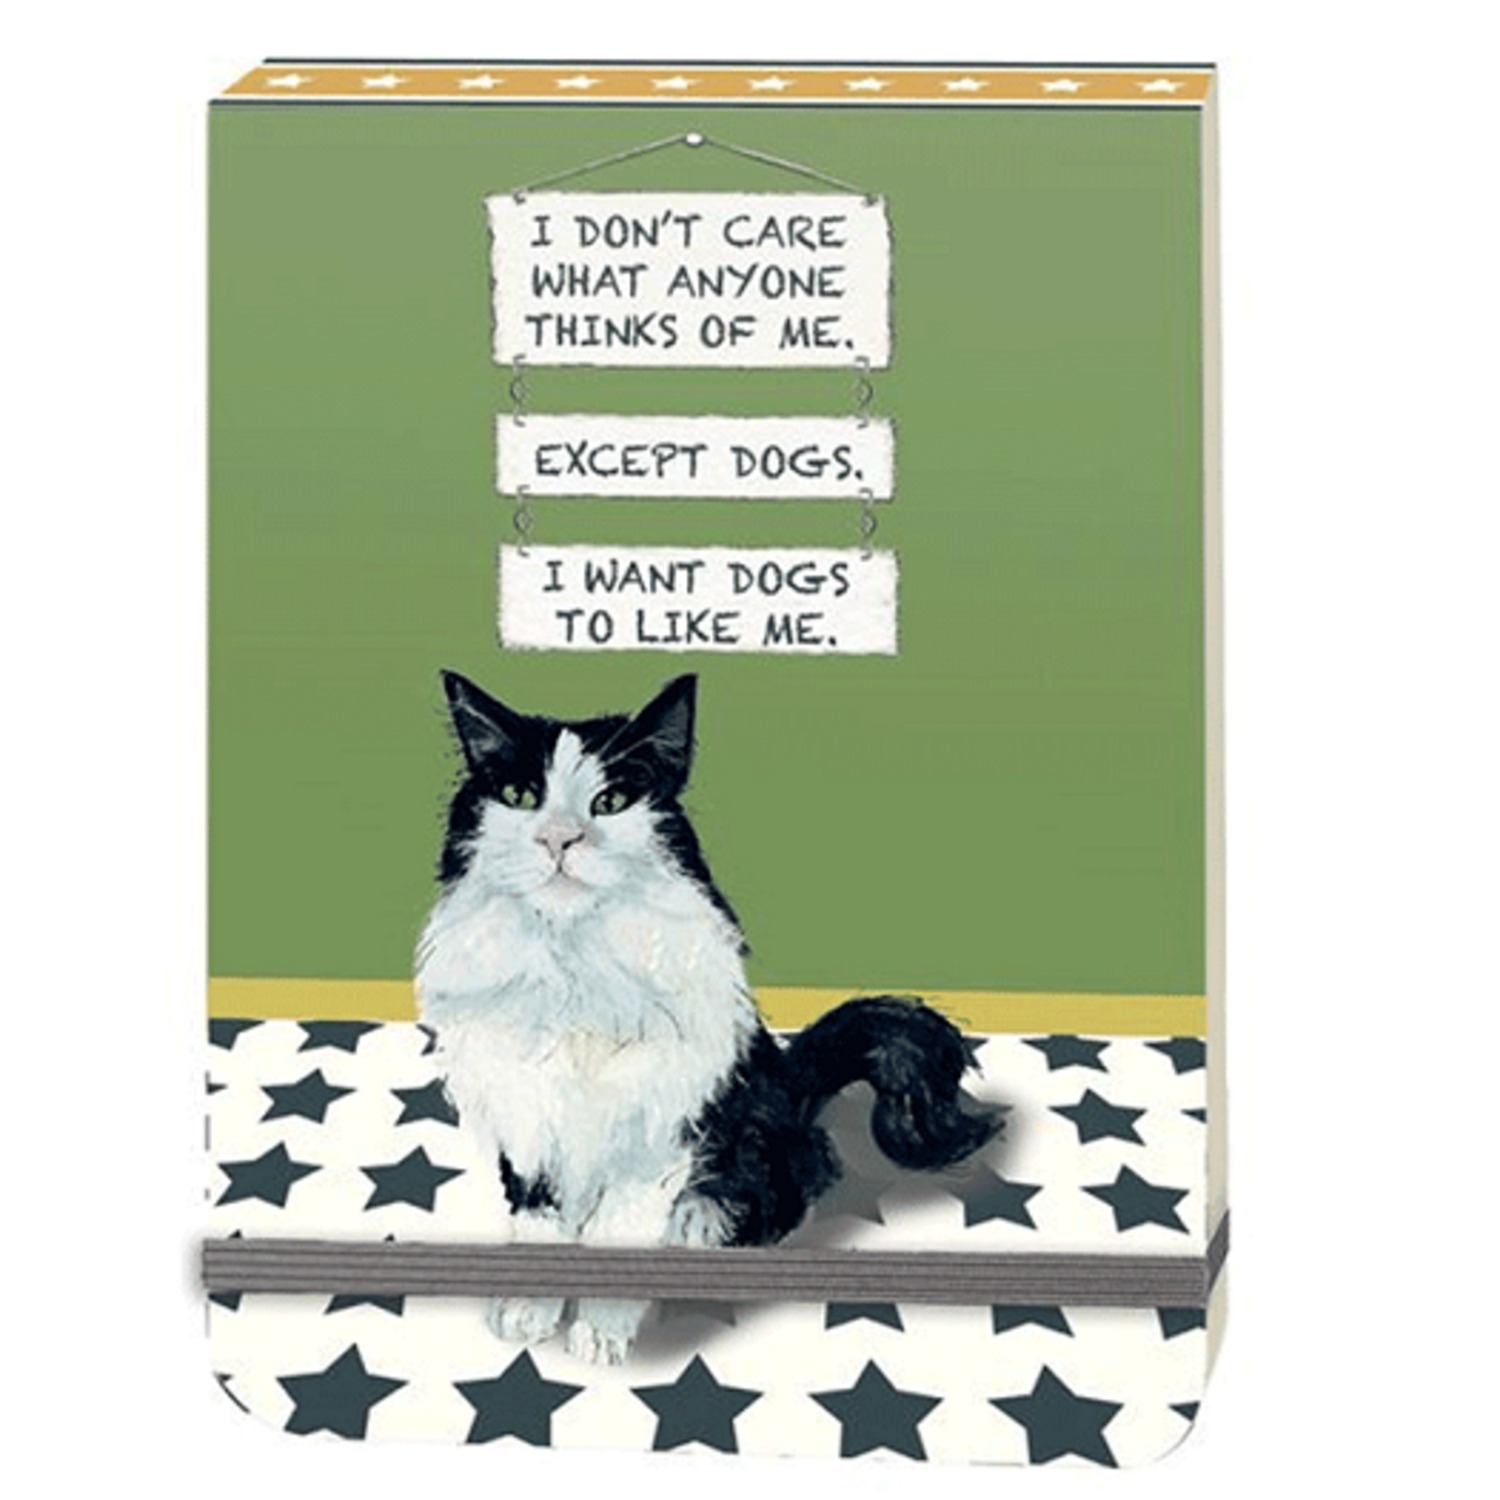 The Little Dog Laughed Notebook Collection|||